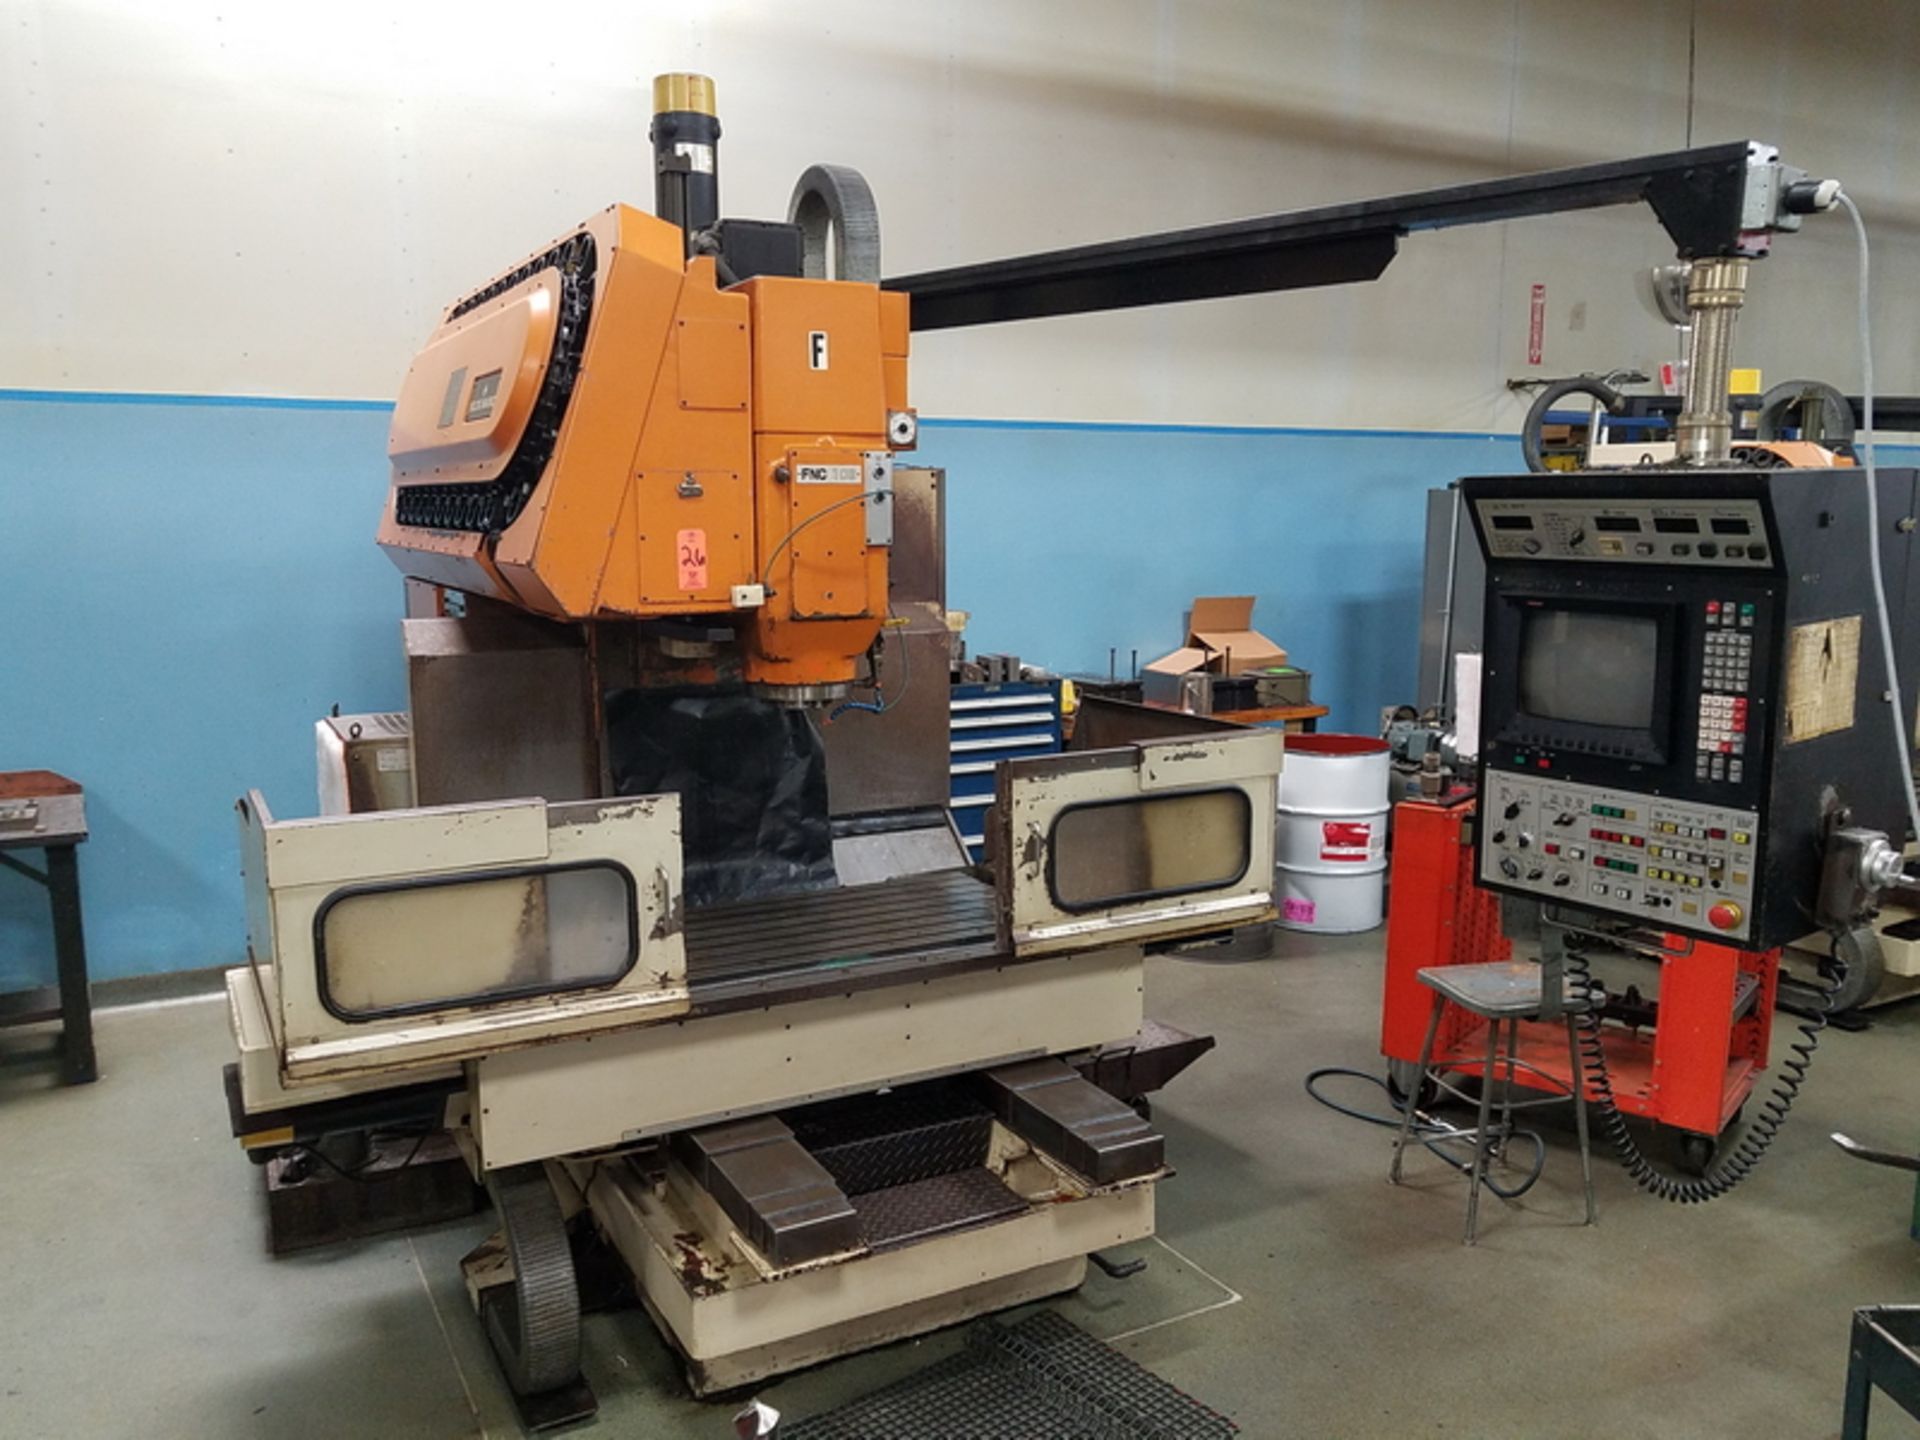 LeBlond Makino Model FNC106-A30 CNC Vertical Machining Center, S/N: A58-1039 (1983); with 30-